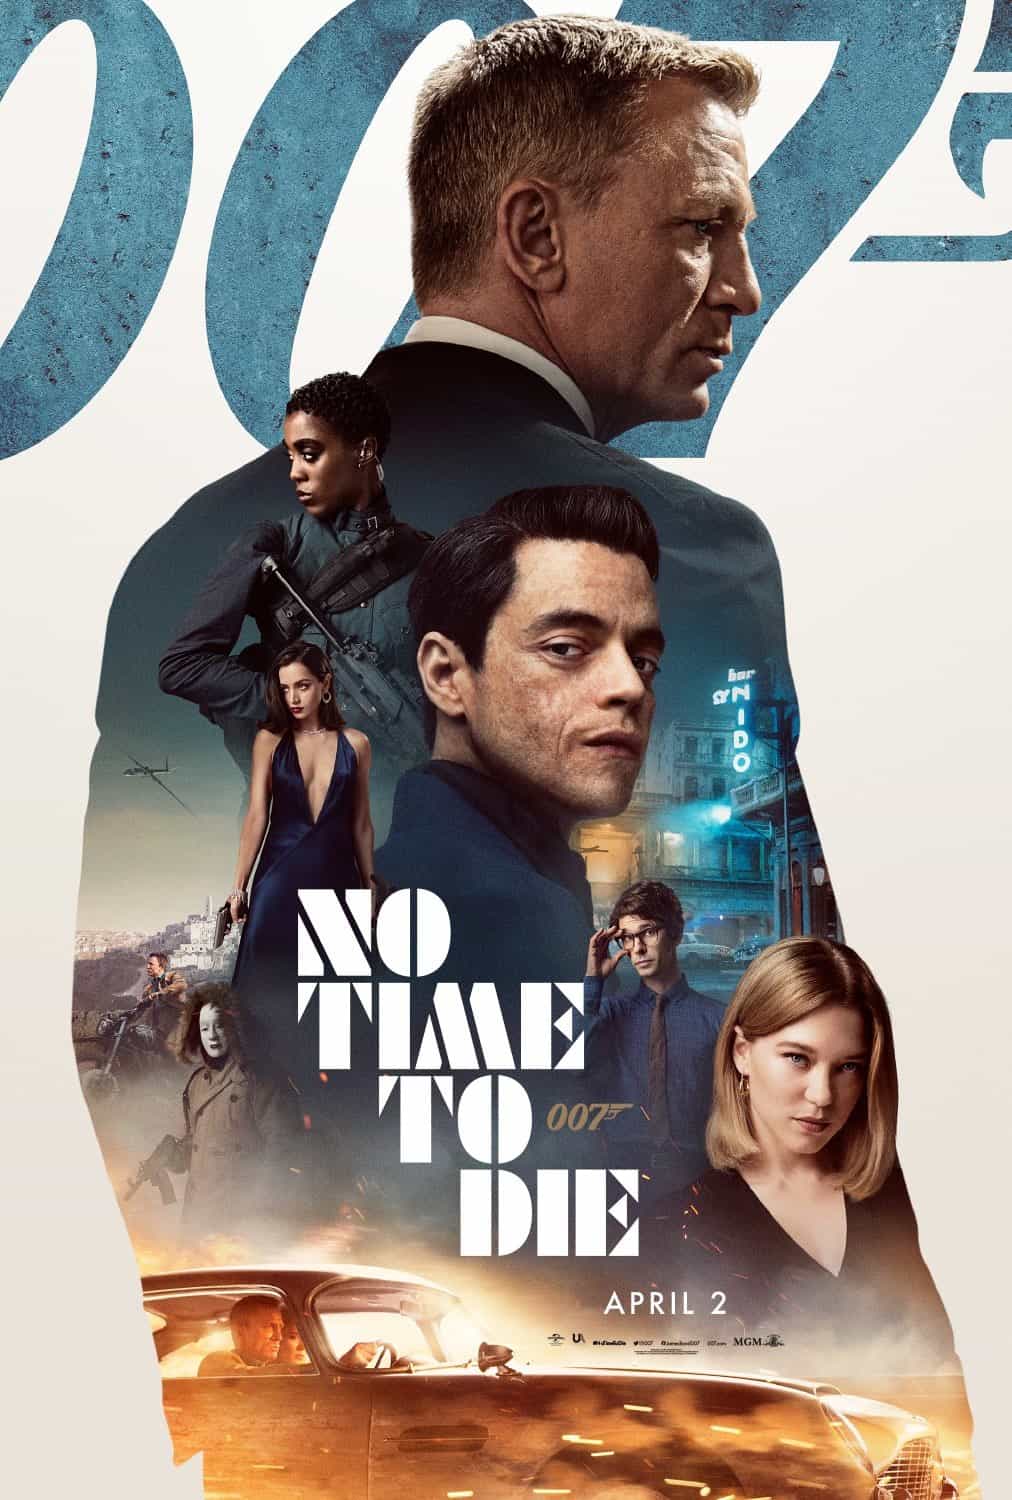 New poster release for No Time To Die starring Daniel Craig - movie release date 12th November 2020